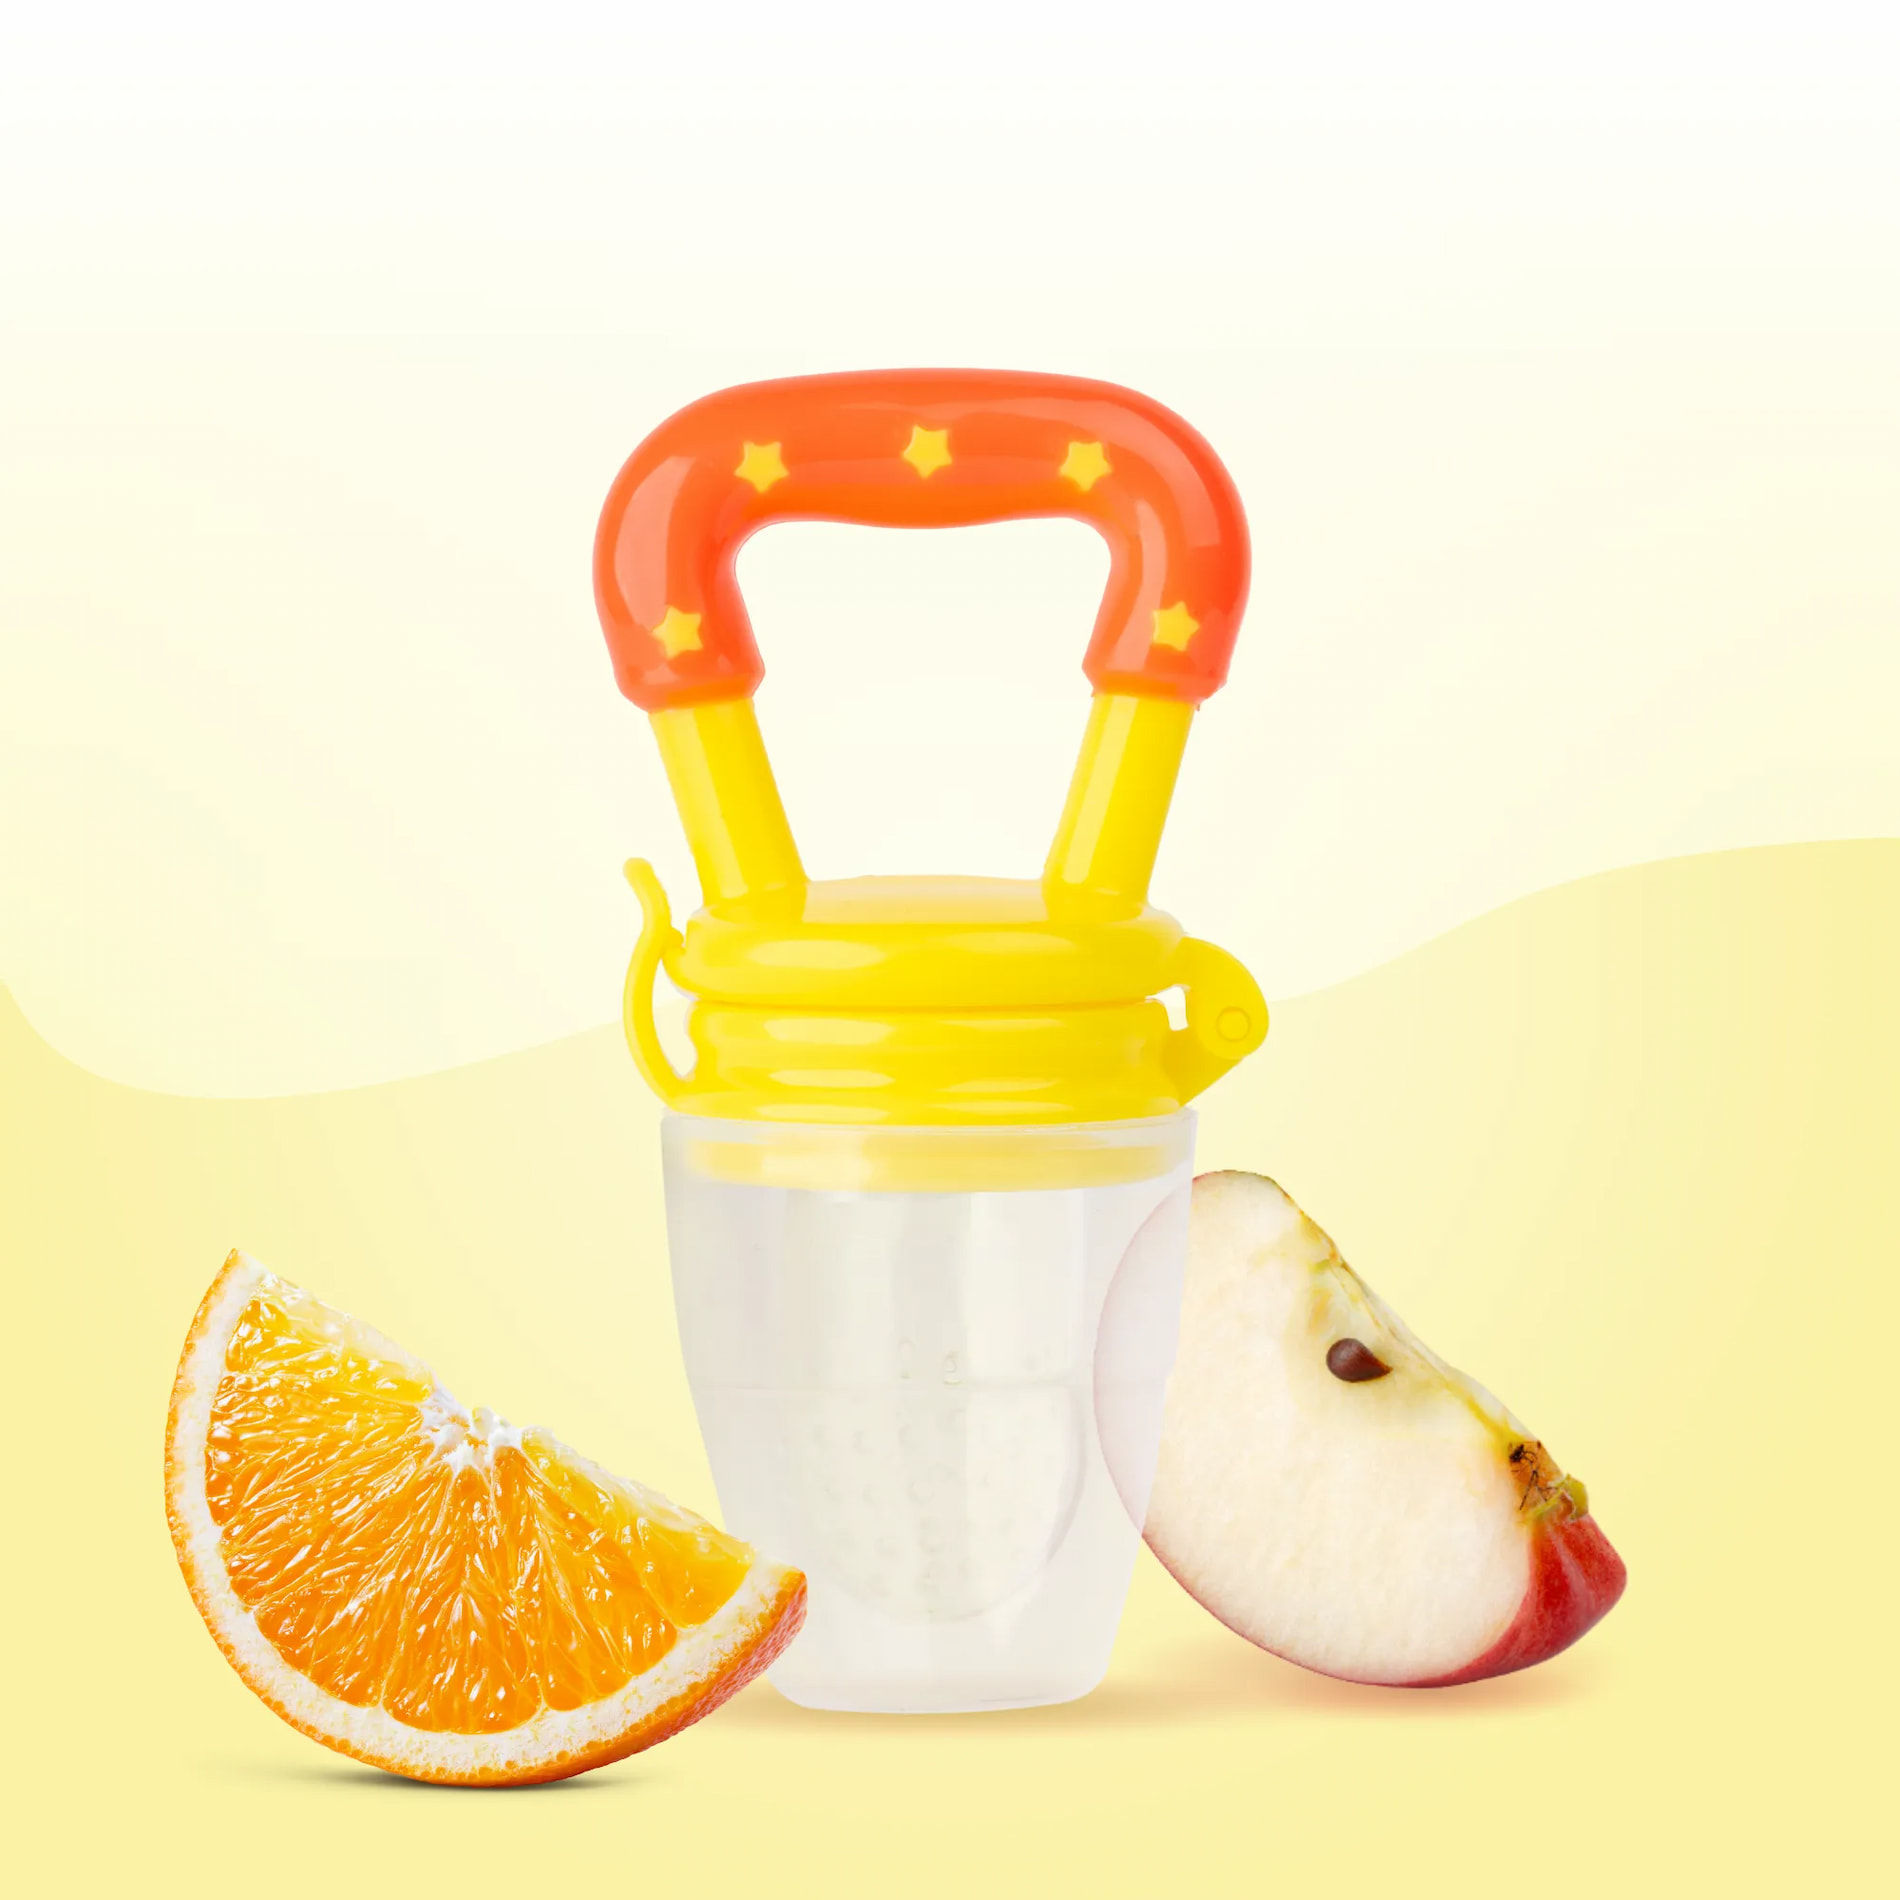 Feels Natural Ultra Soft Fruit & Food Nibbler- Yellow | Convenient to Introduce Fruits & Veggies to Baby | Ultra-soft Silicone Mesh for Easy Chewing | Easy One Snap Filling | Helps Relieve Teething Discomfort